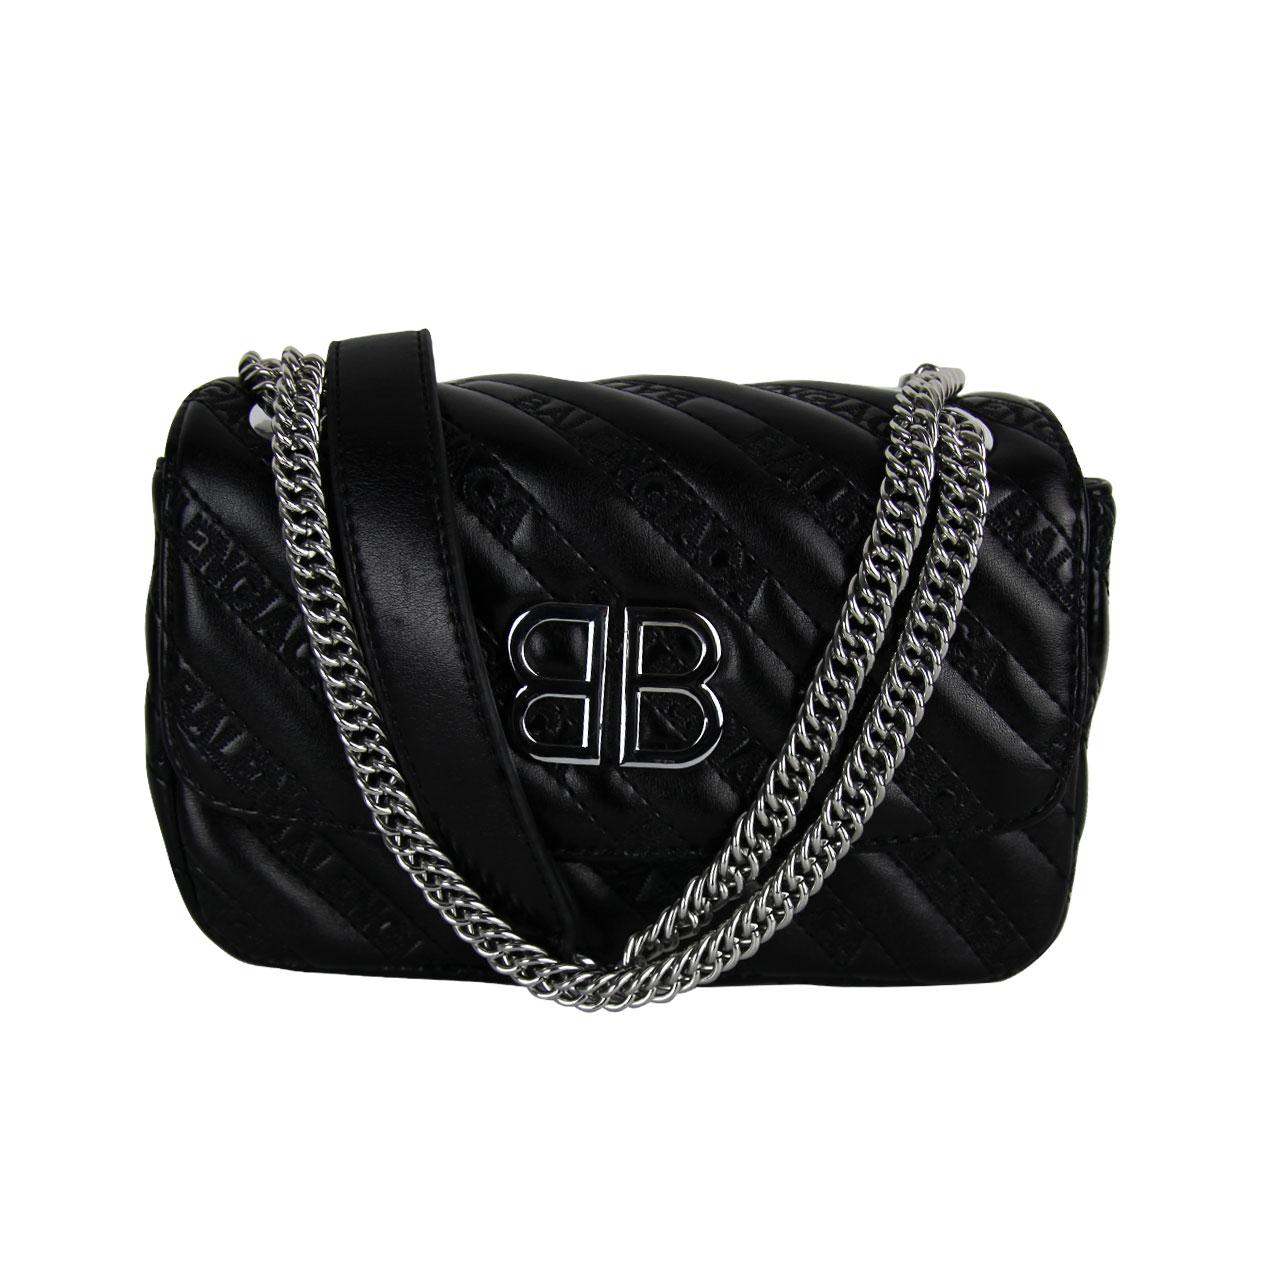 Real Leather Quilted Small Black Crossbody Purse With Leather And Silver Chain Strap For Women